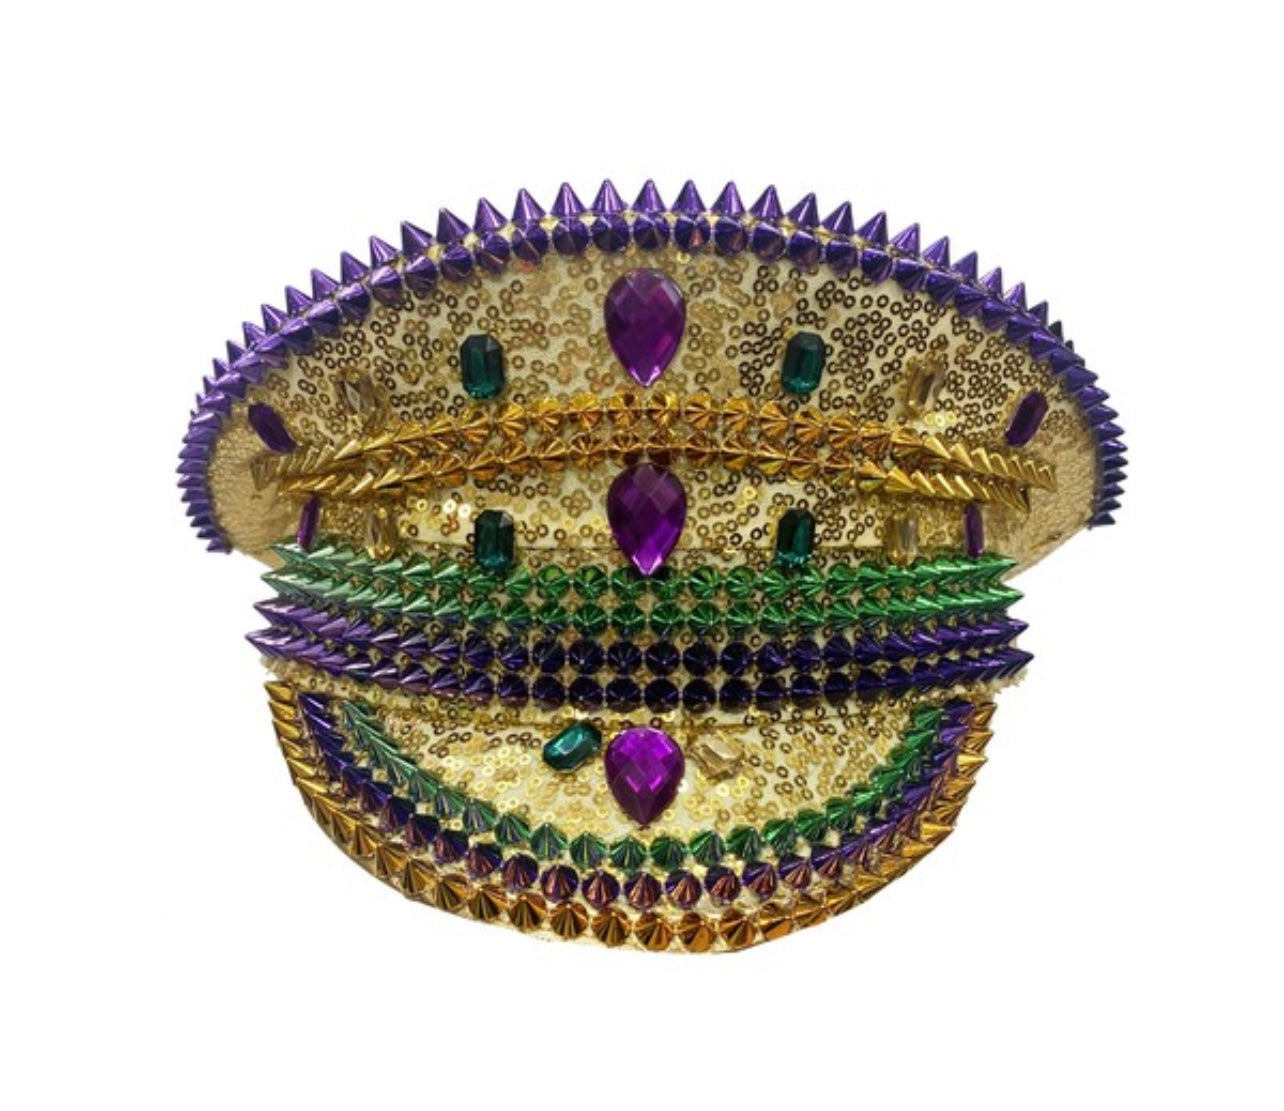 Conductor of the Mardi Gras Hat